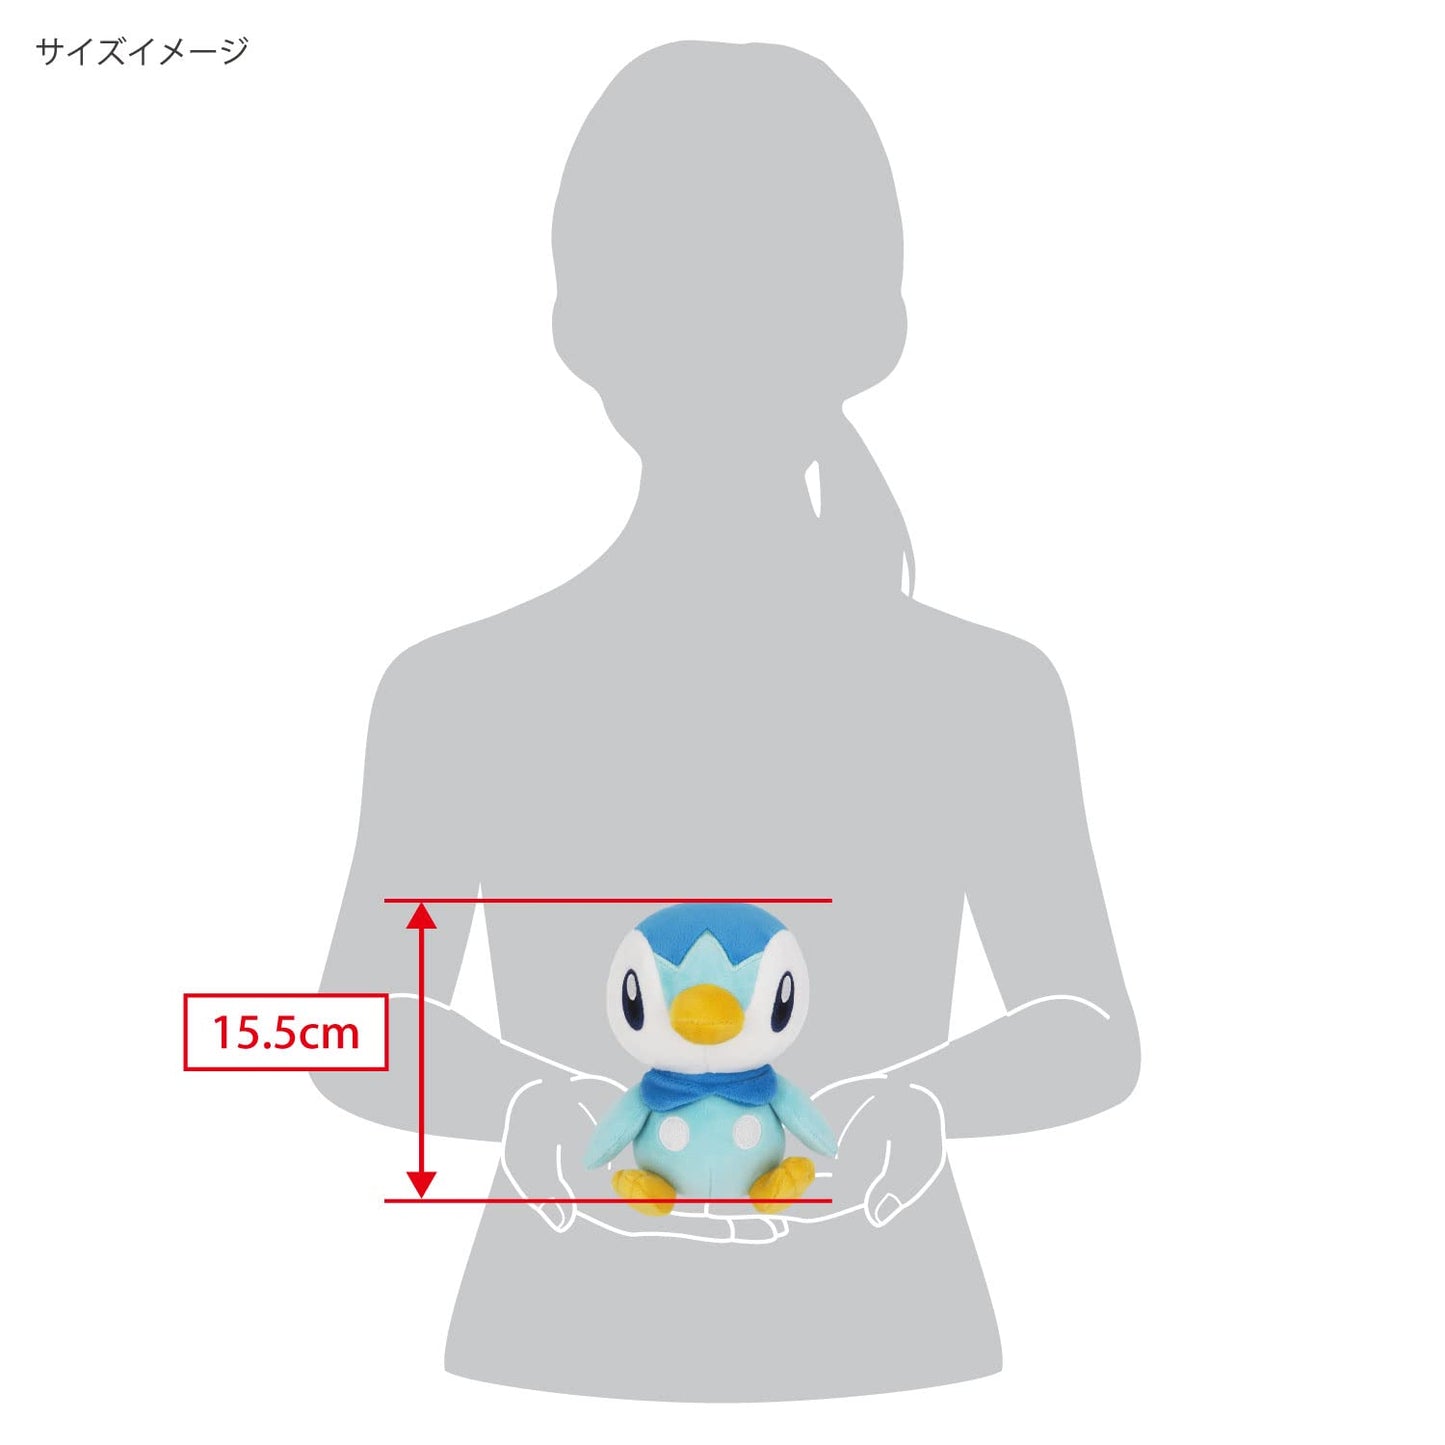 Sanei Pokemon All Star Collection - PP89 - Piplup Plush 6", Blue